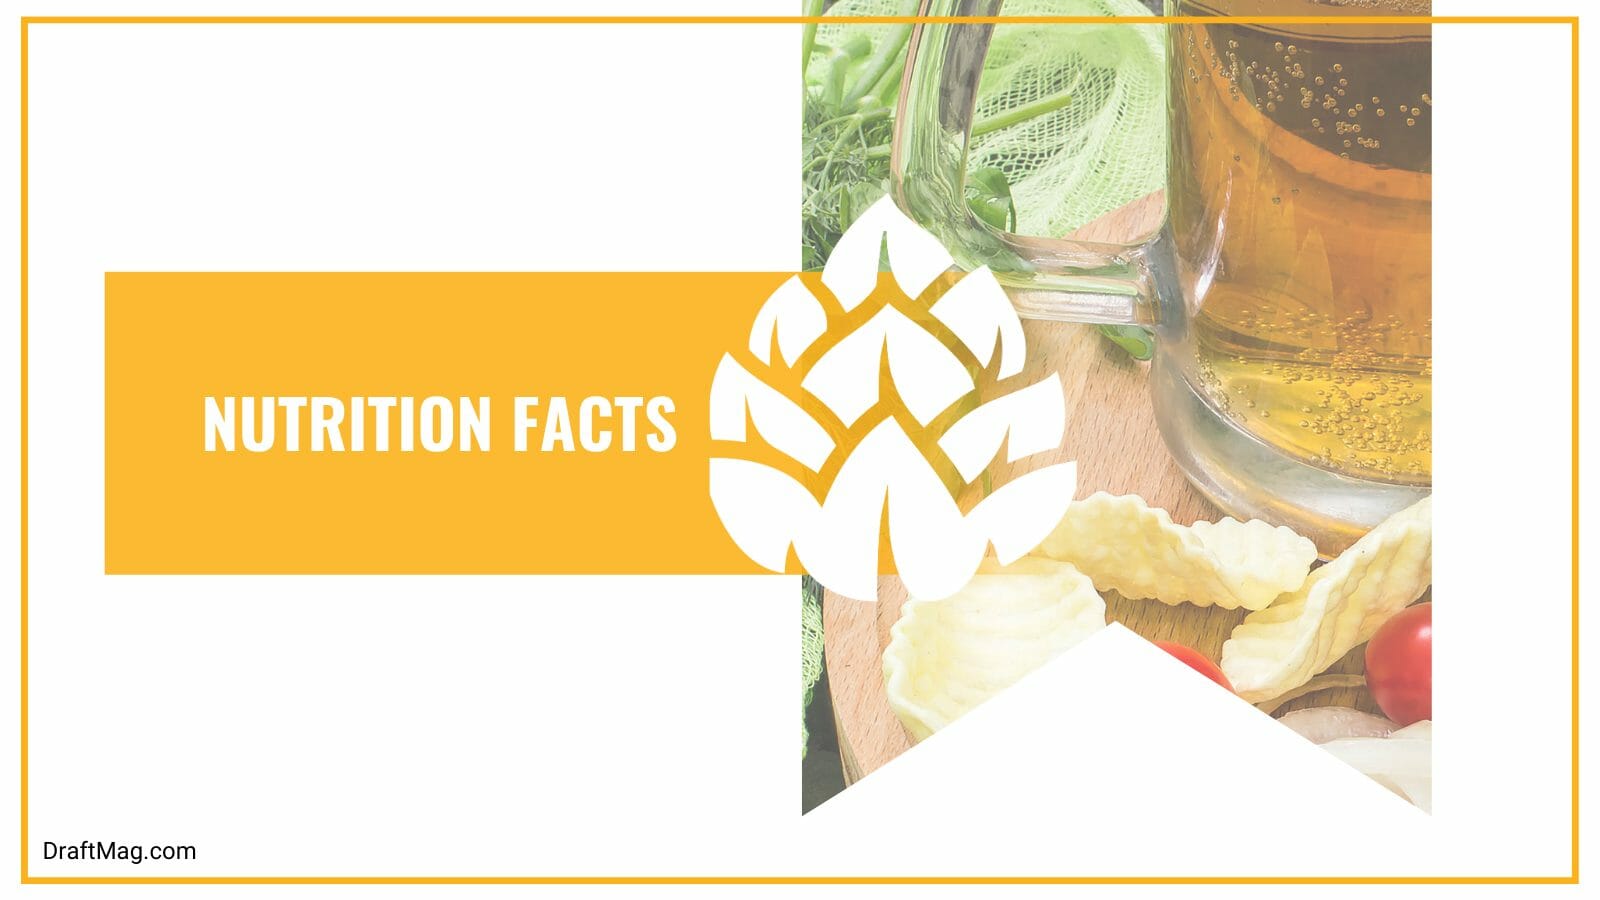 Nutritional details of wheat beer